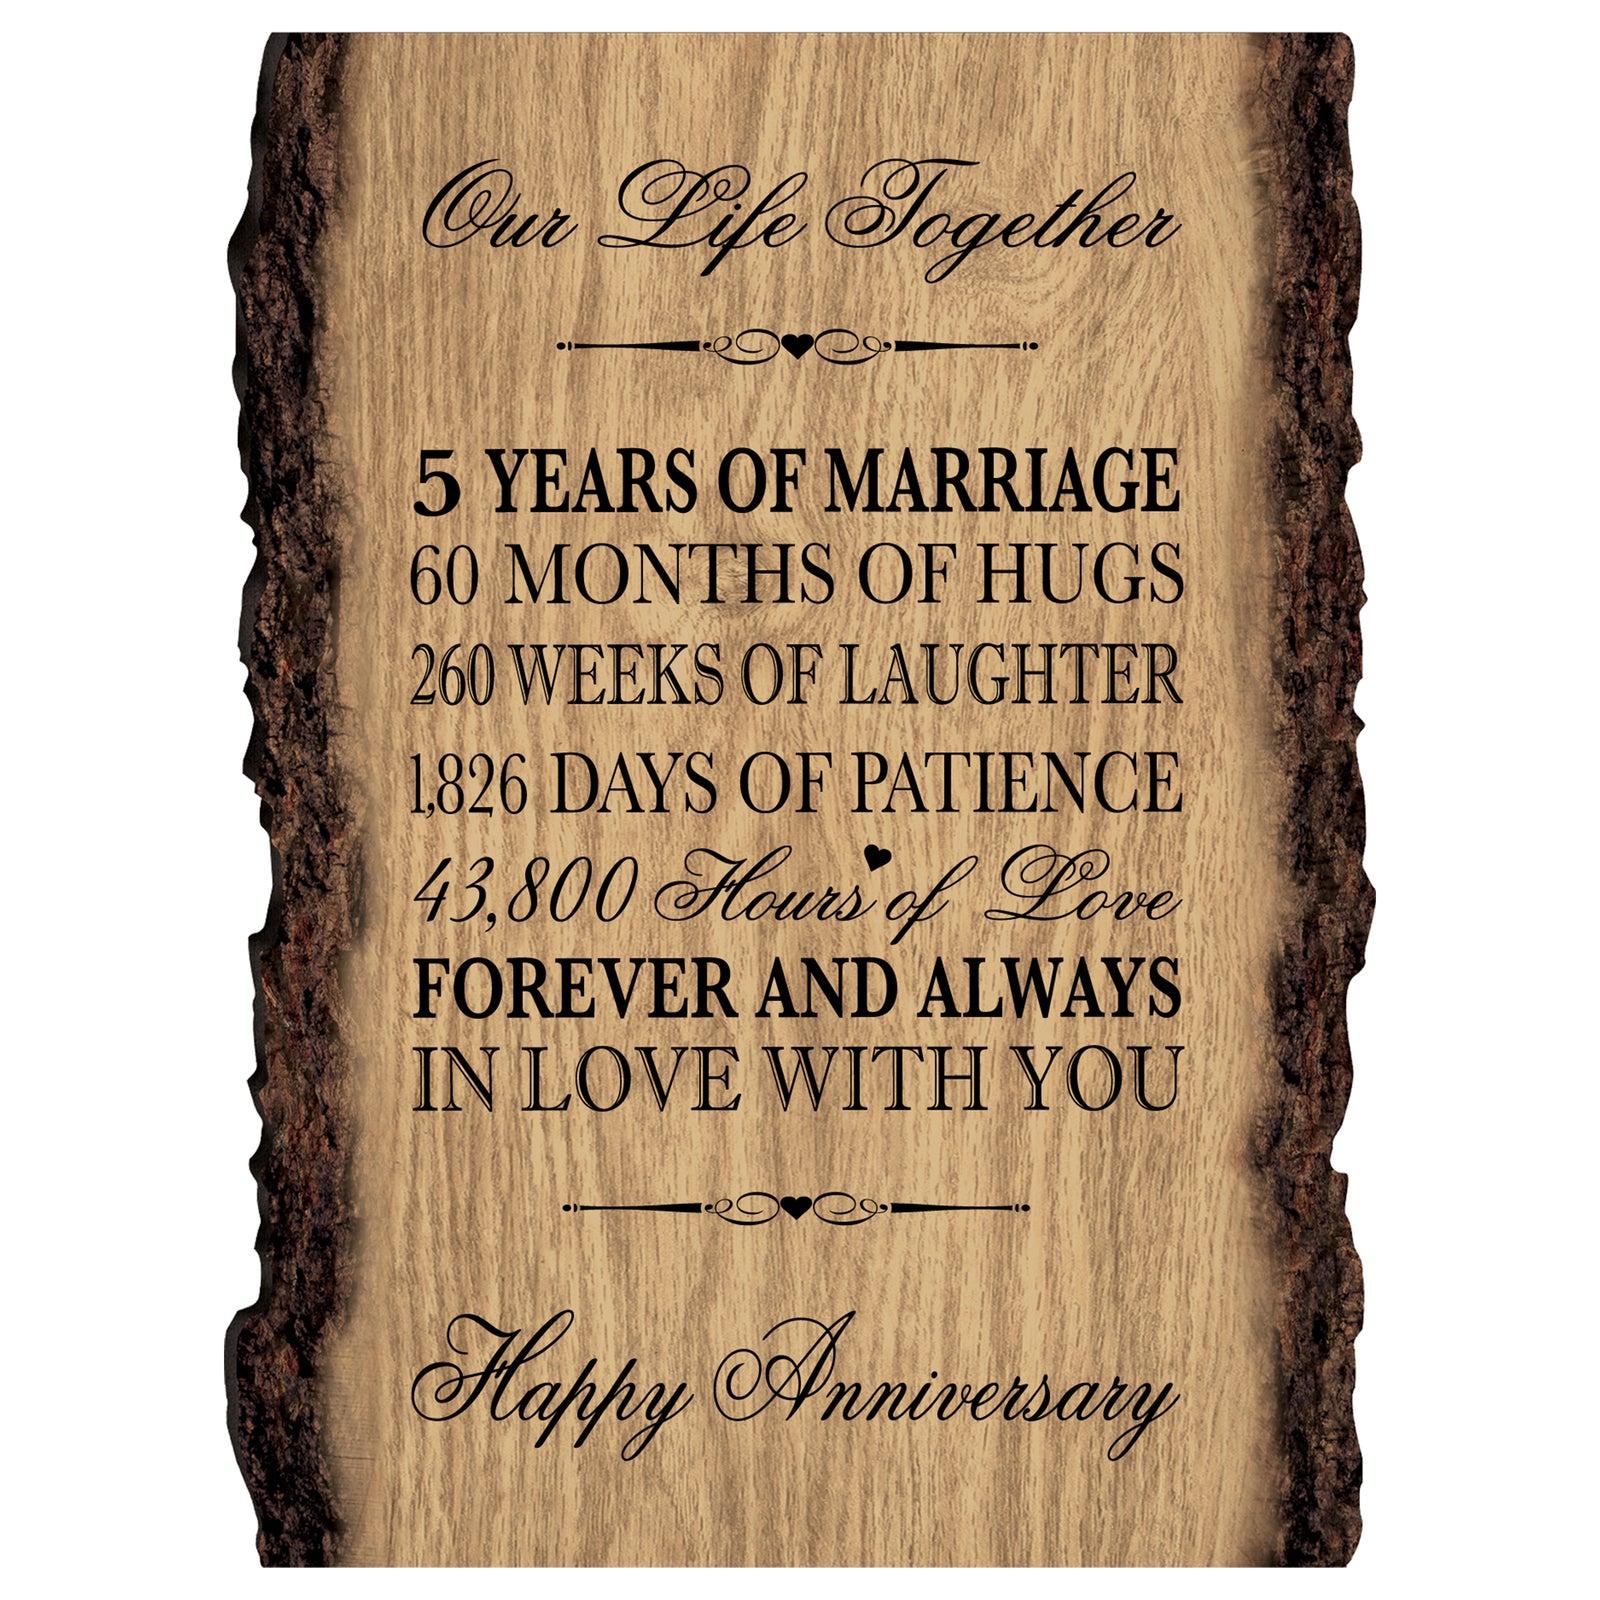 Rustic Wedding Anniversary 9x12 Barky Wall Plaque Gift For Parents, Grandparents New Couple - 5 Years Of Marriage